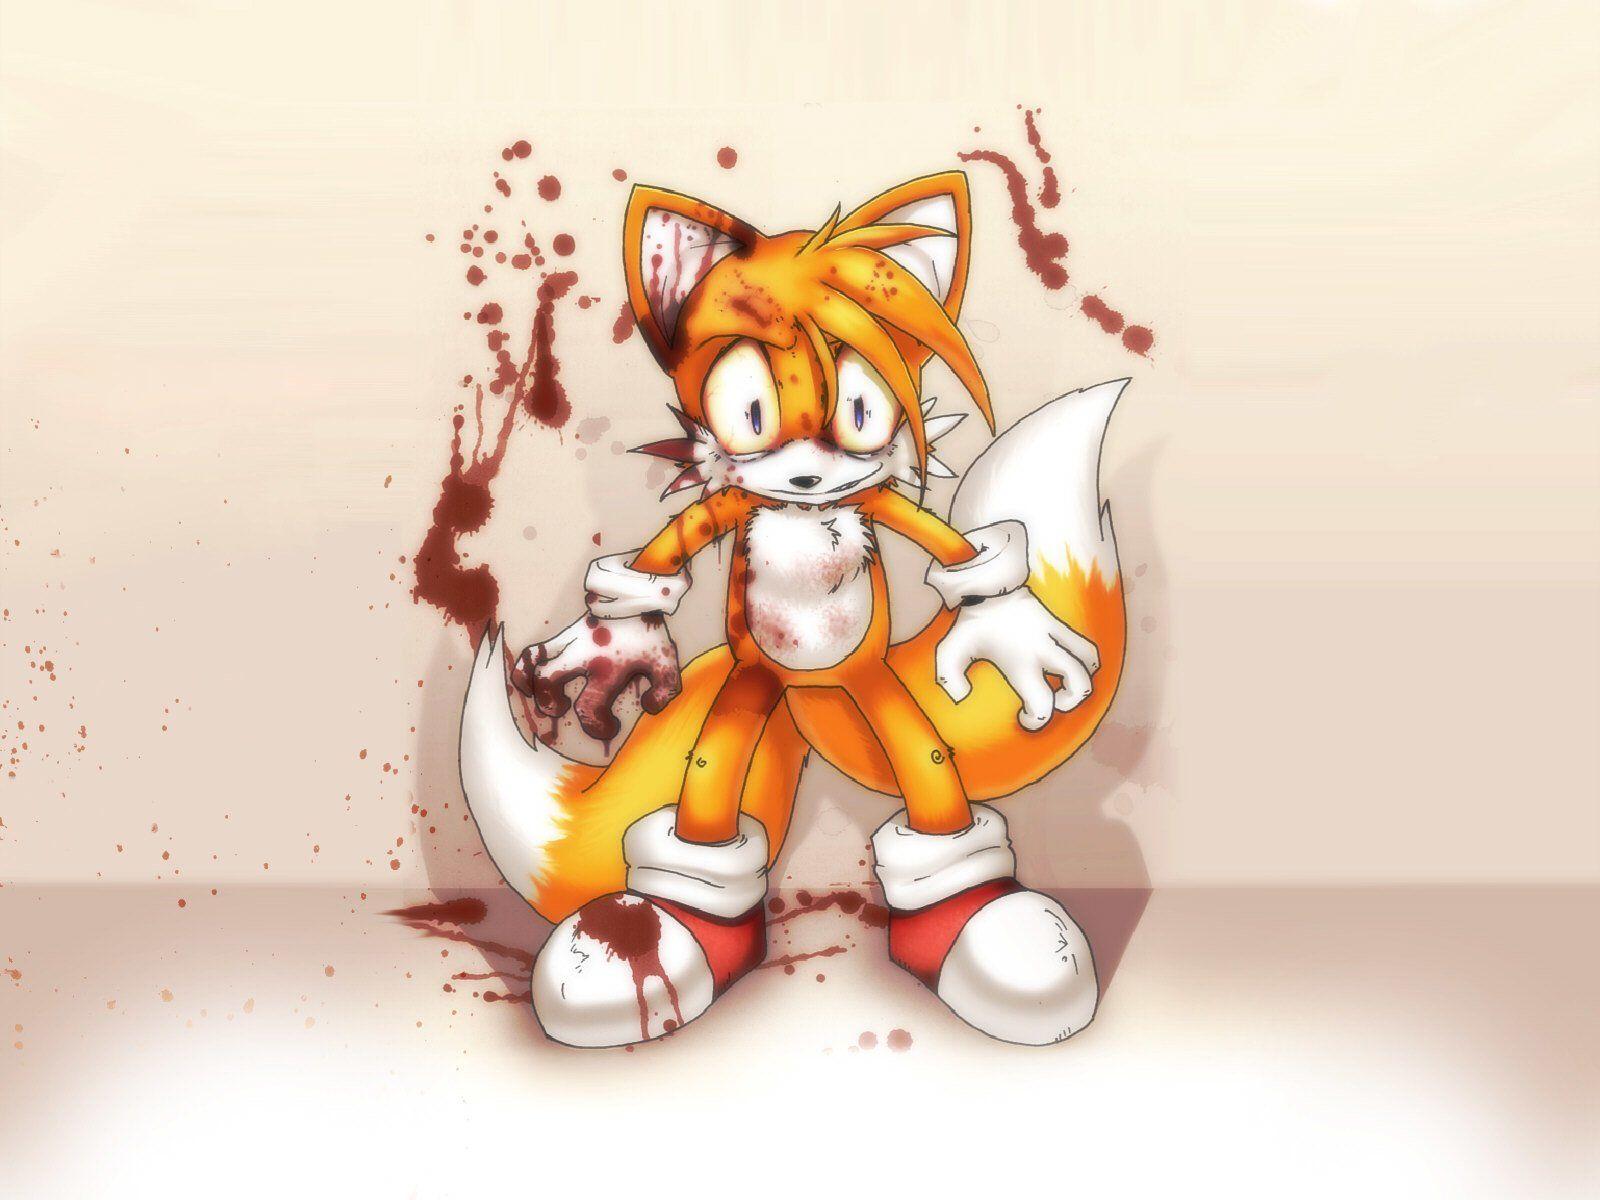 Tails Sonic the Hedgehog 2 4K Wallpaper iPhone HD Phone 3431g